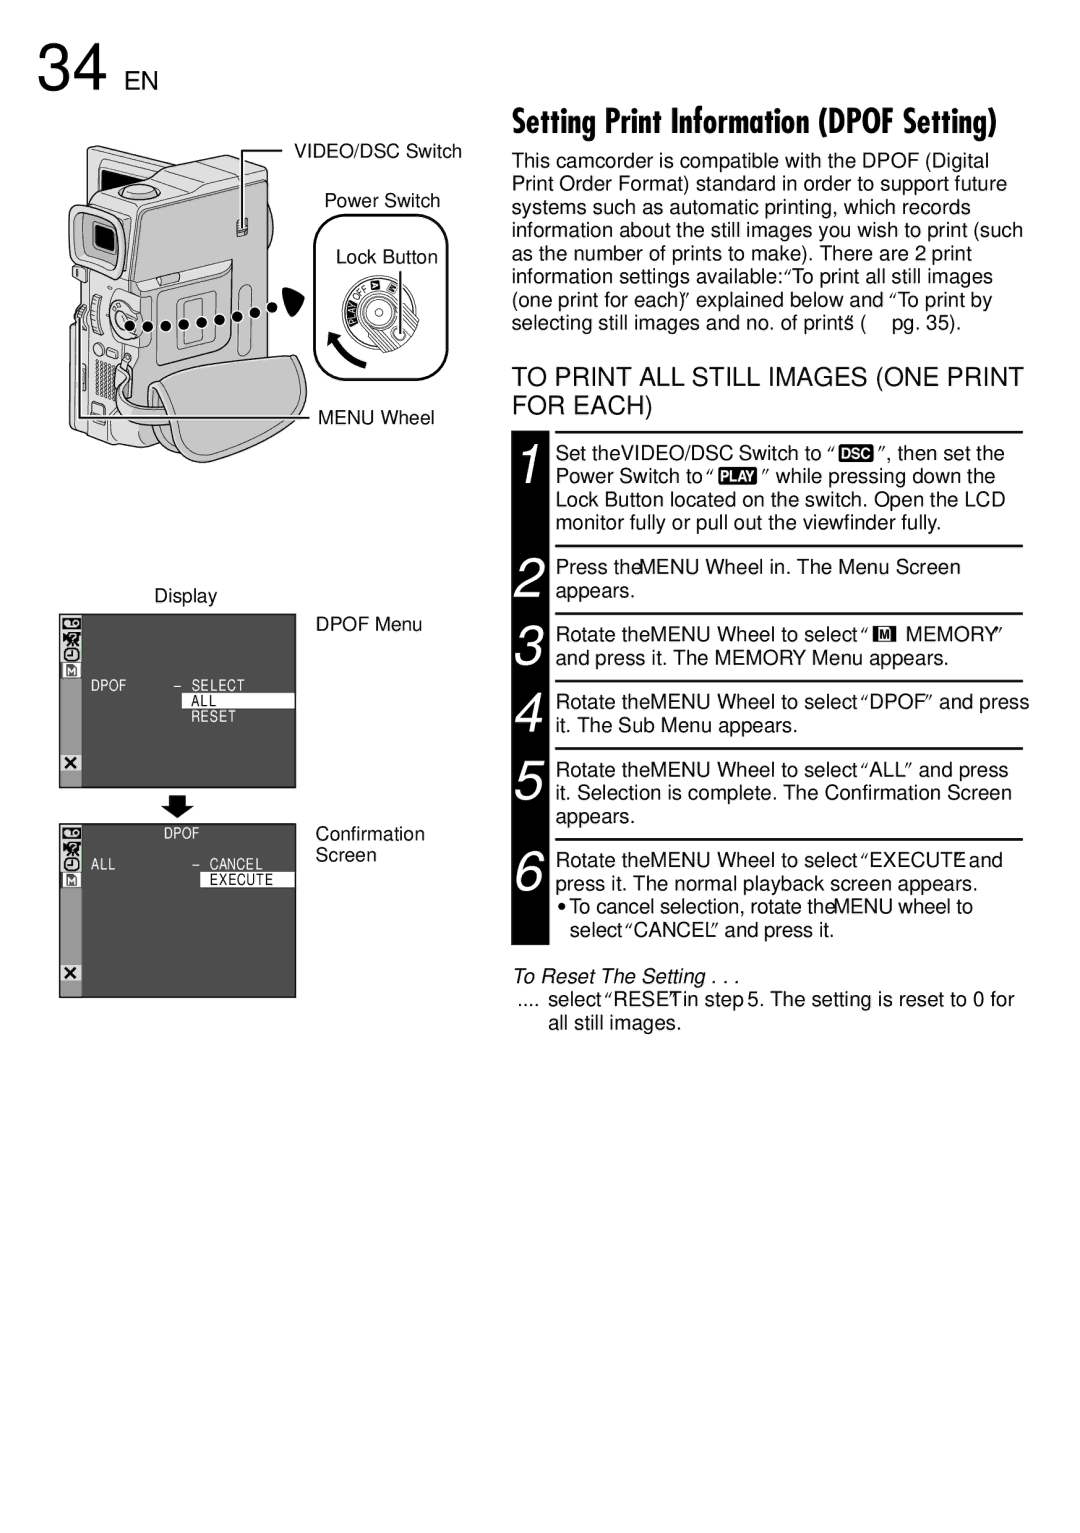 JVC GR-DVM75 specifications 34 EN, To Print ALL Still Images ONE Print for Each, To Reset The Setting 